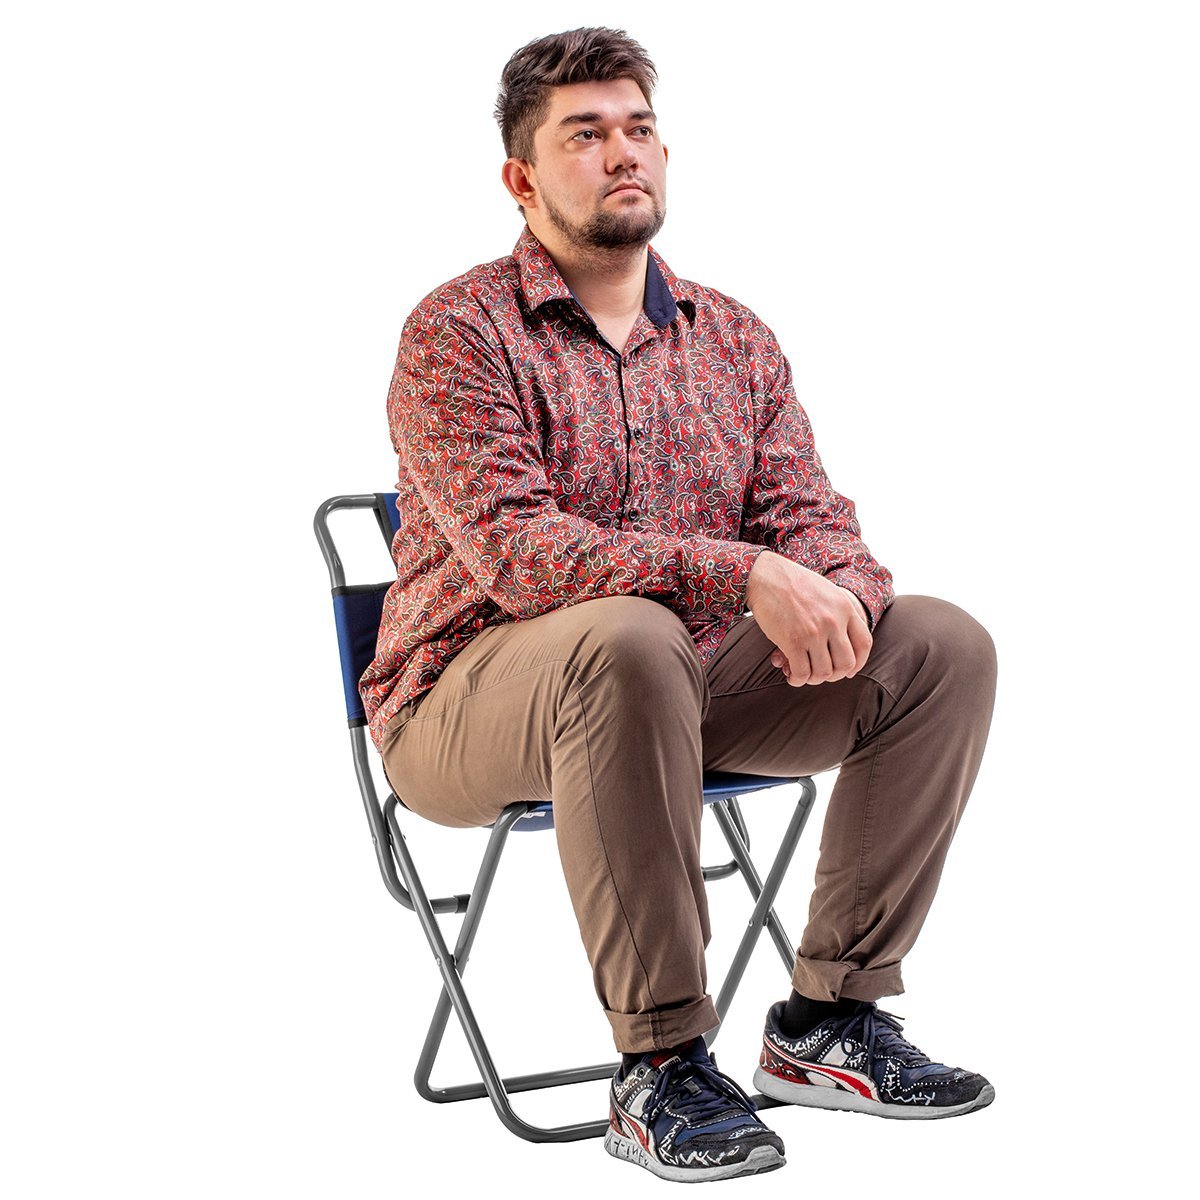 Man wearing a beard, shirt, trousers and snickers sitting on the folding camping chair with back support